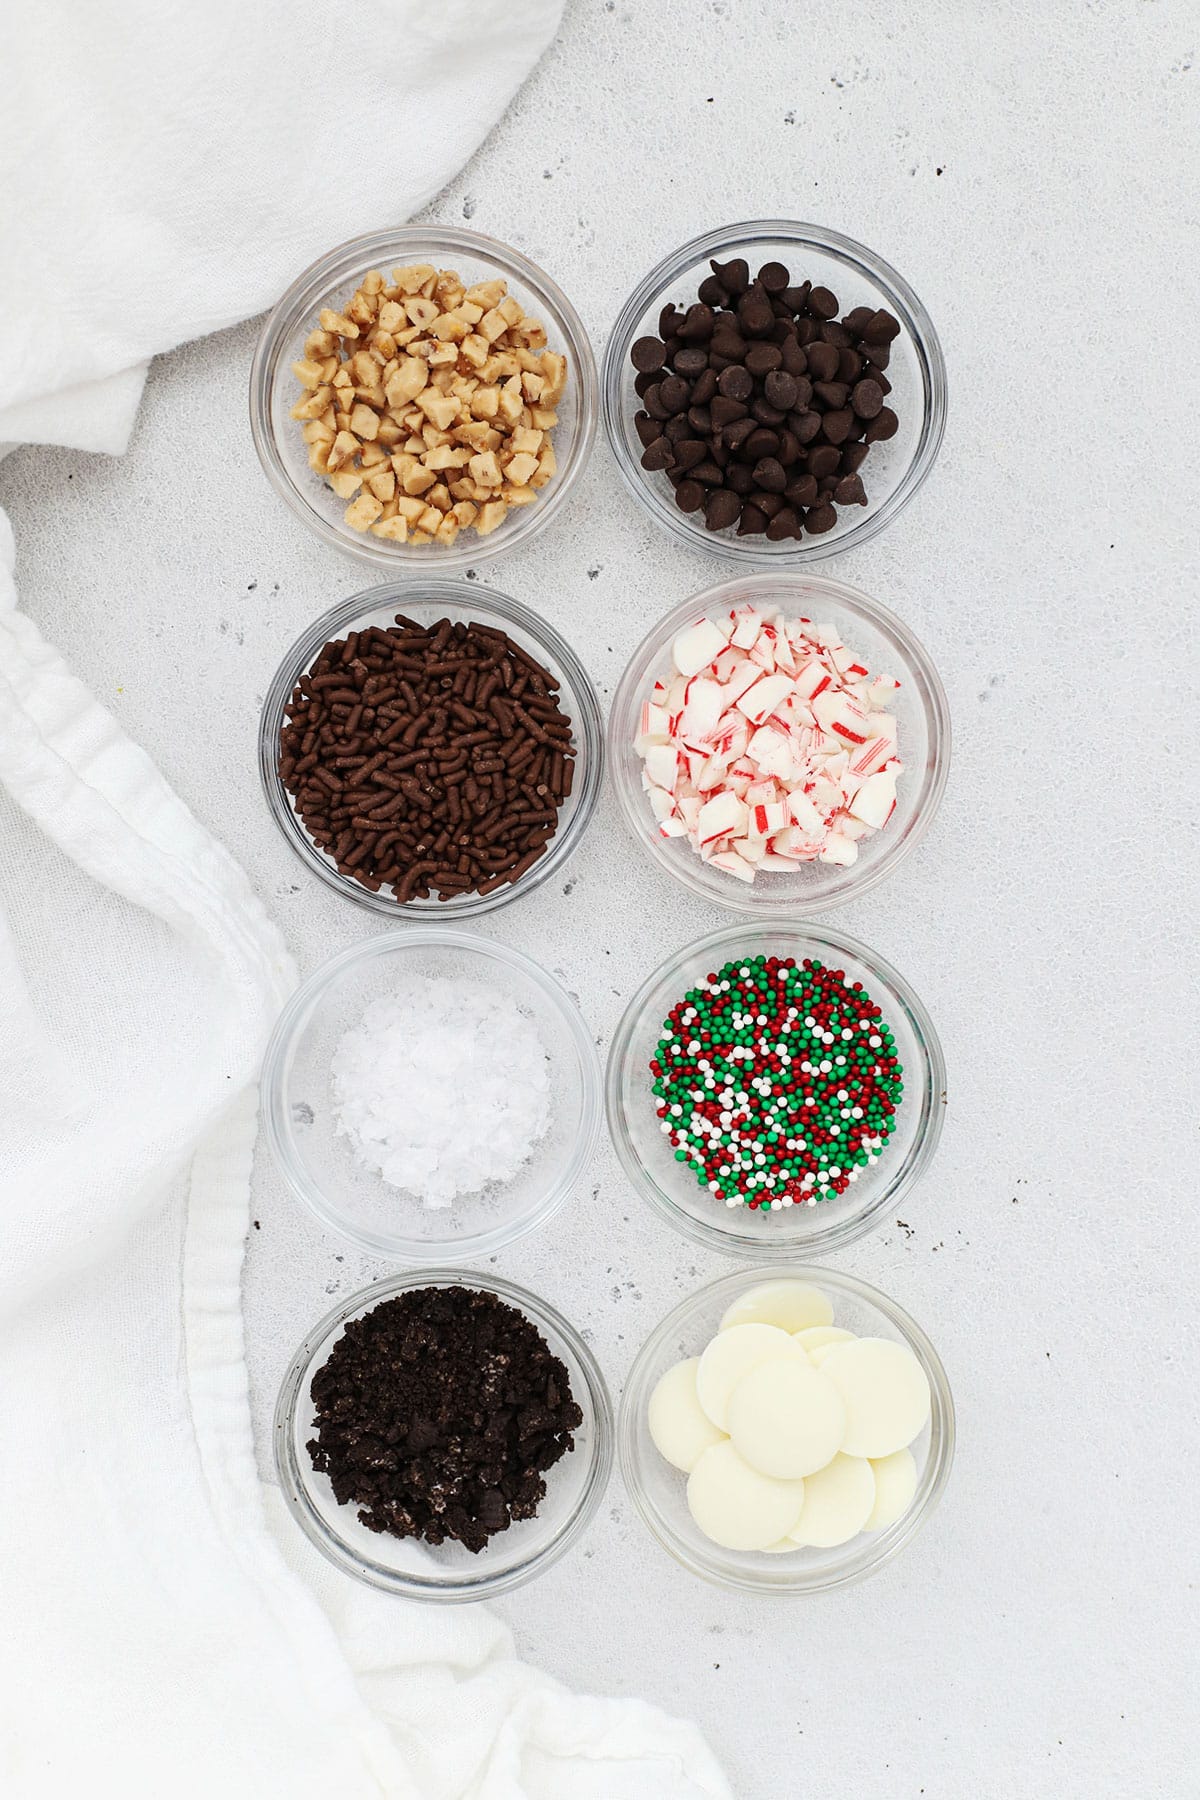 Toppings for oreo balls in small bowls